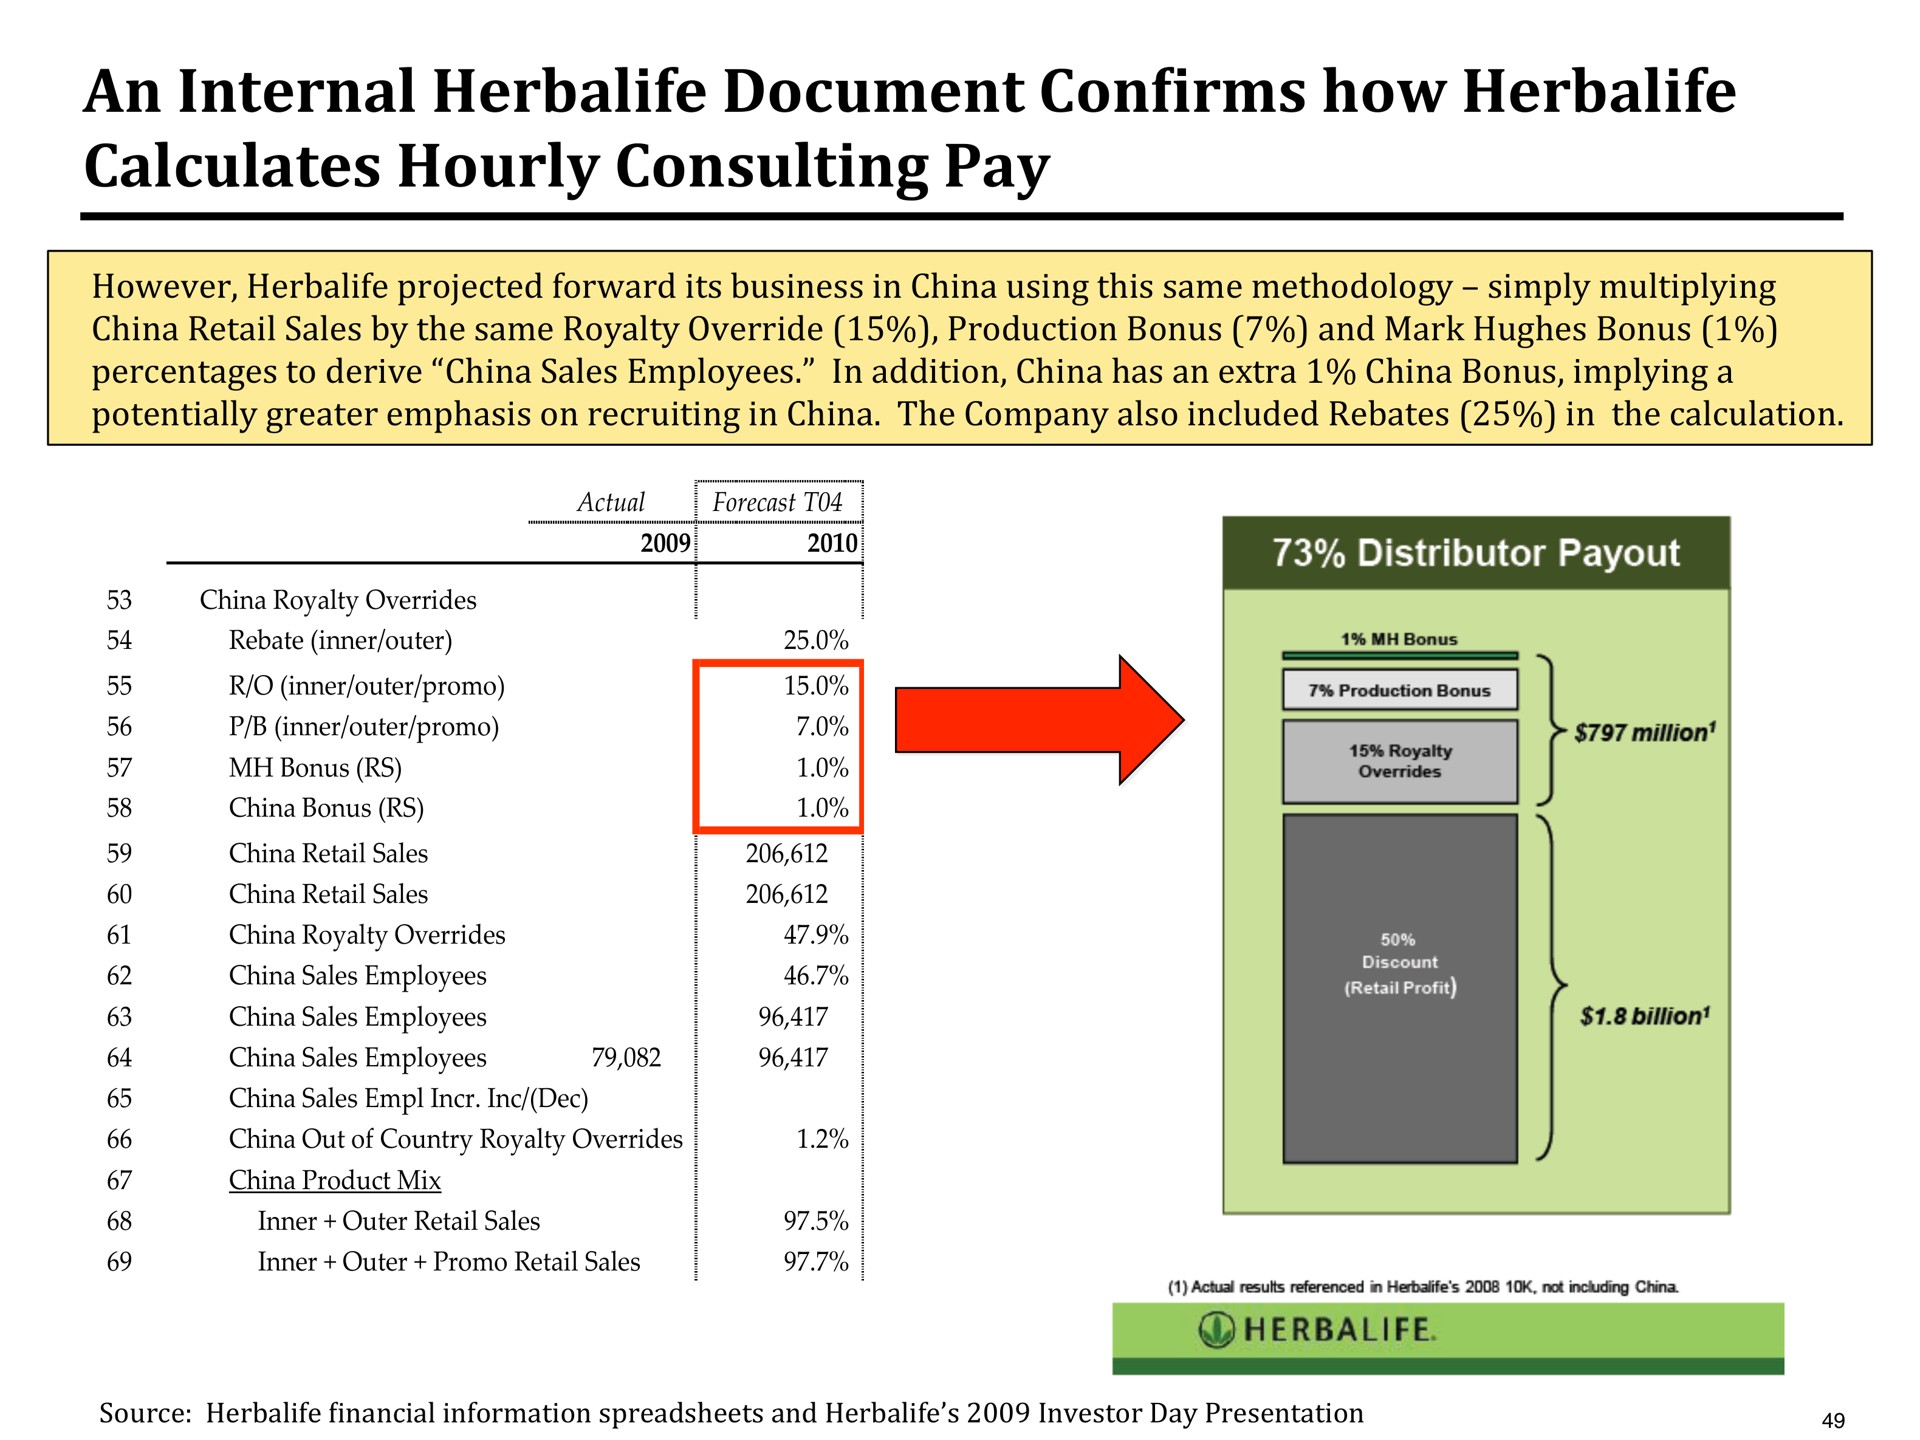 an internal document confirms how calculates hourly consulting pay | Pershing Square